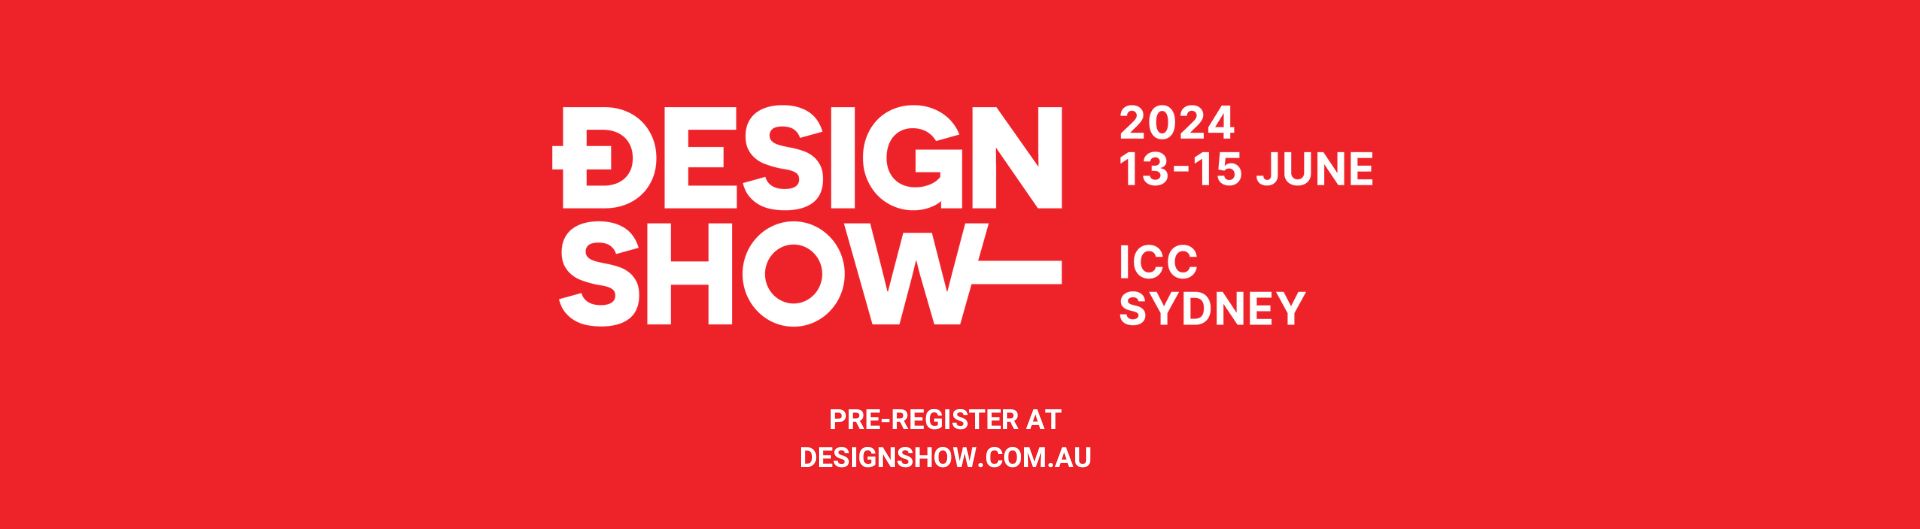 Design Show Australia is coming to ICC Sydney on 13 to 15 June.